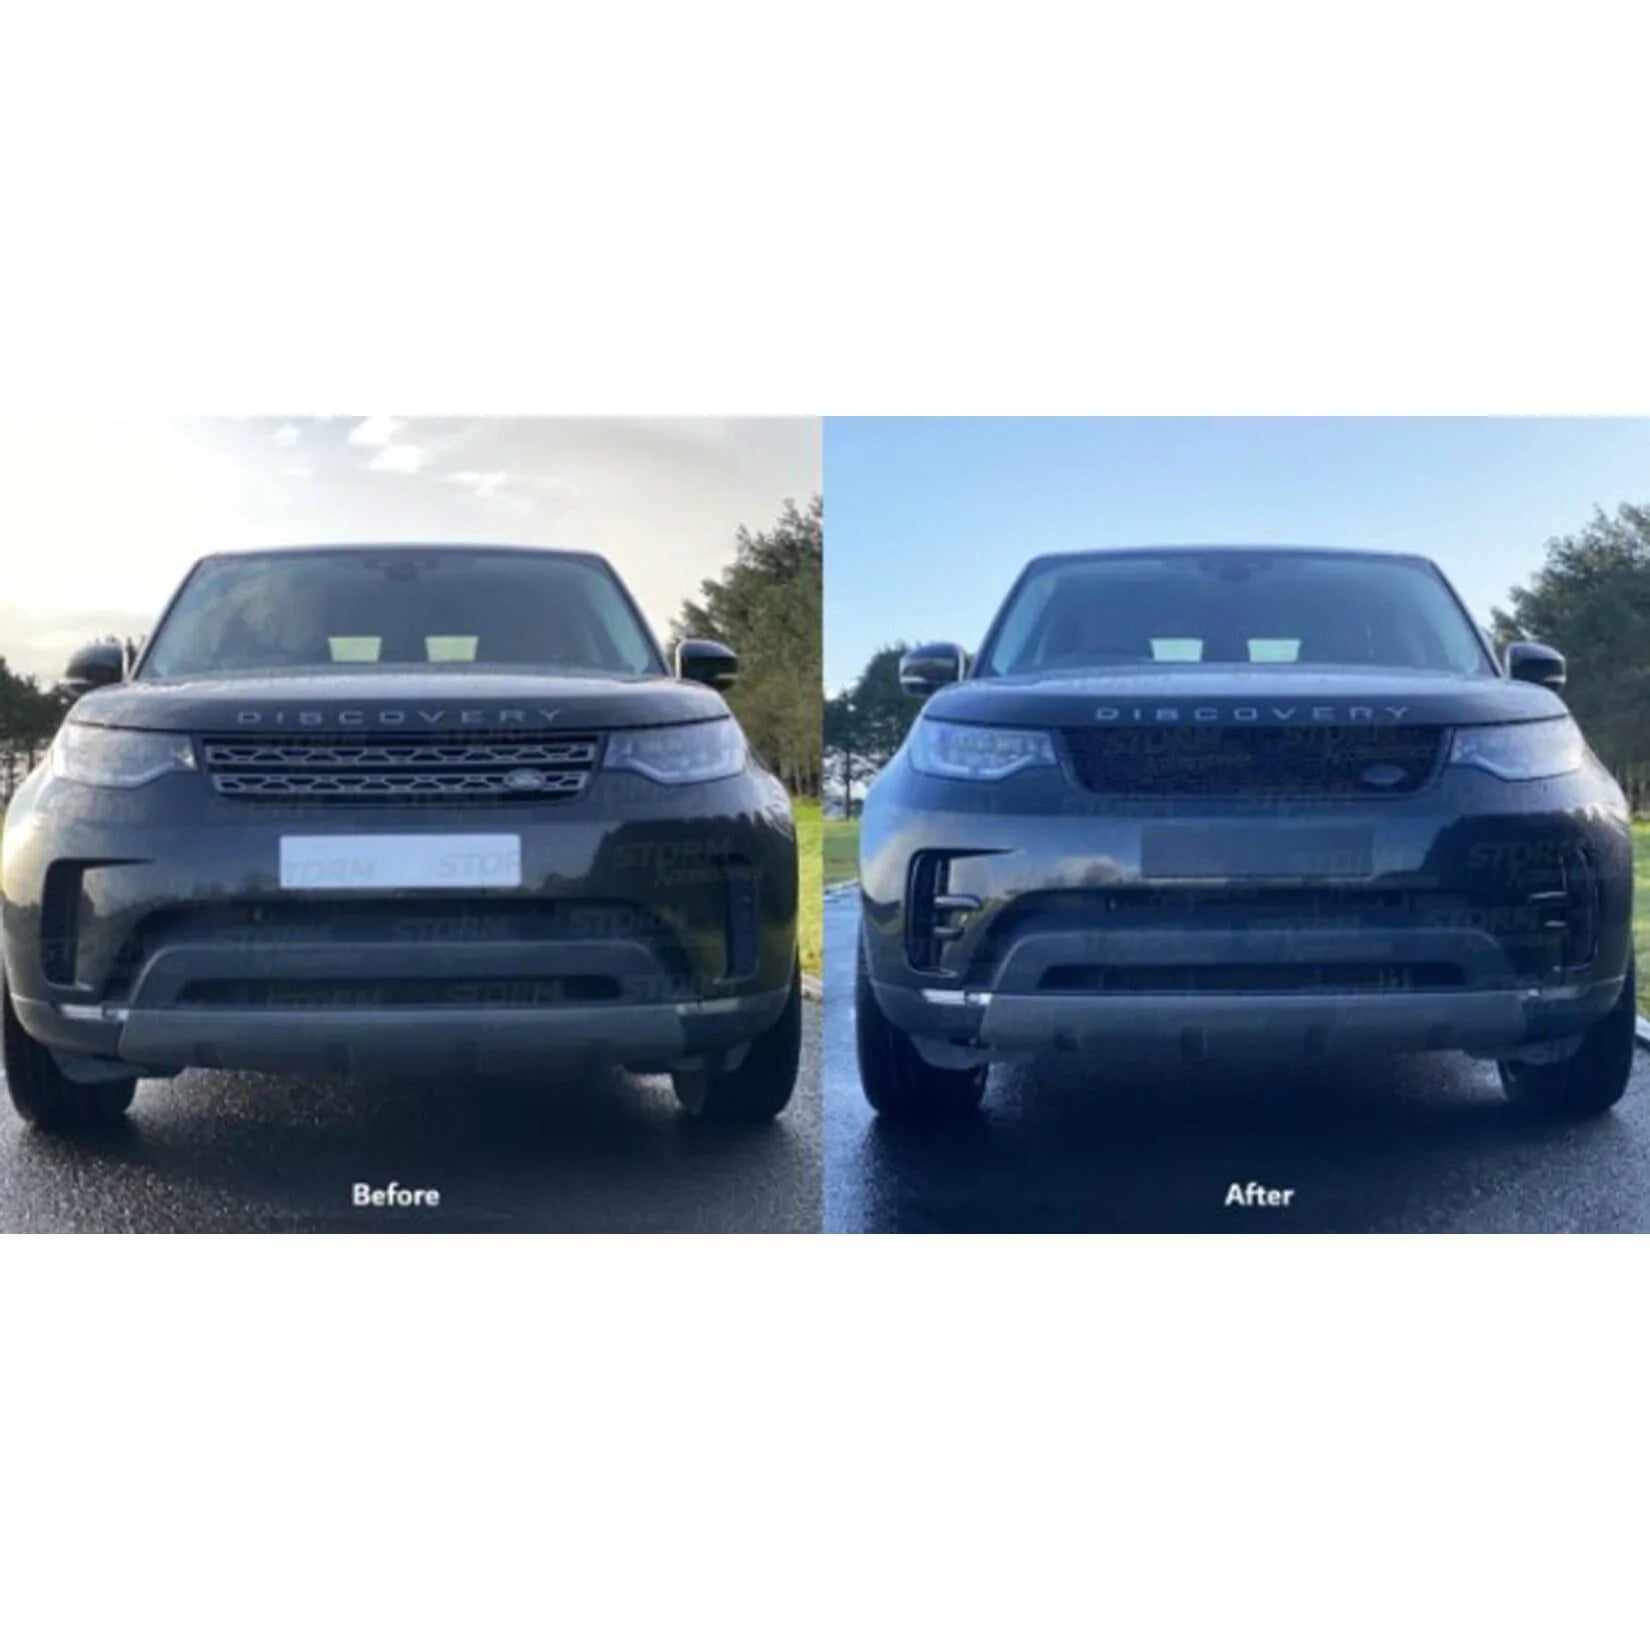 Land Rover Discovery 5 Dynamic Front Grill - Gloss Black